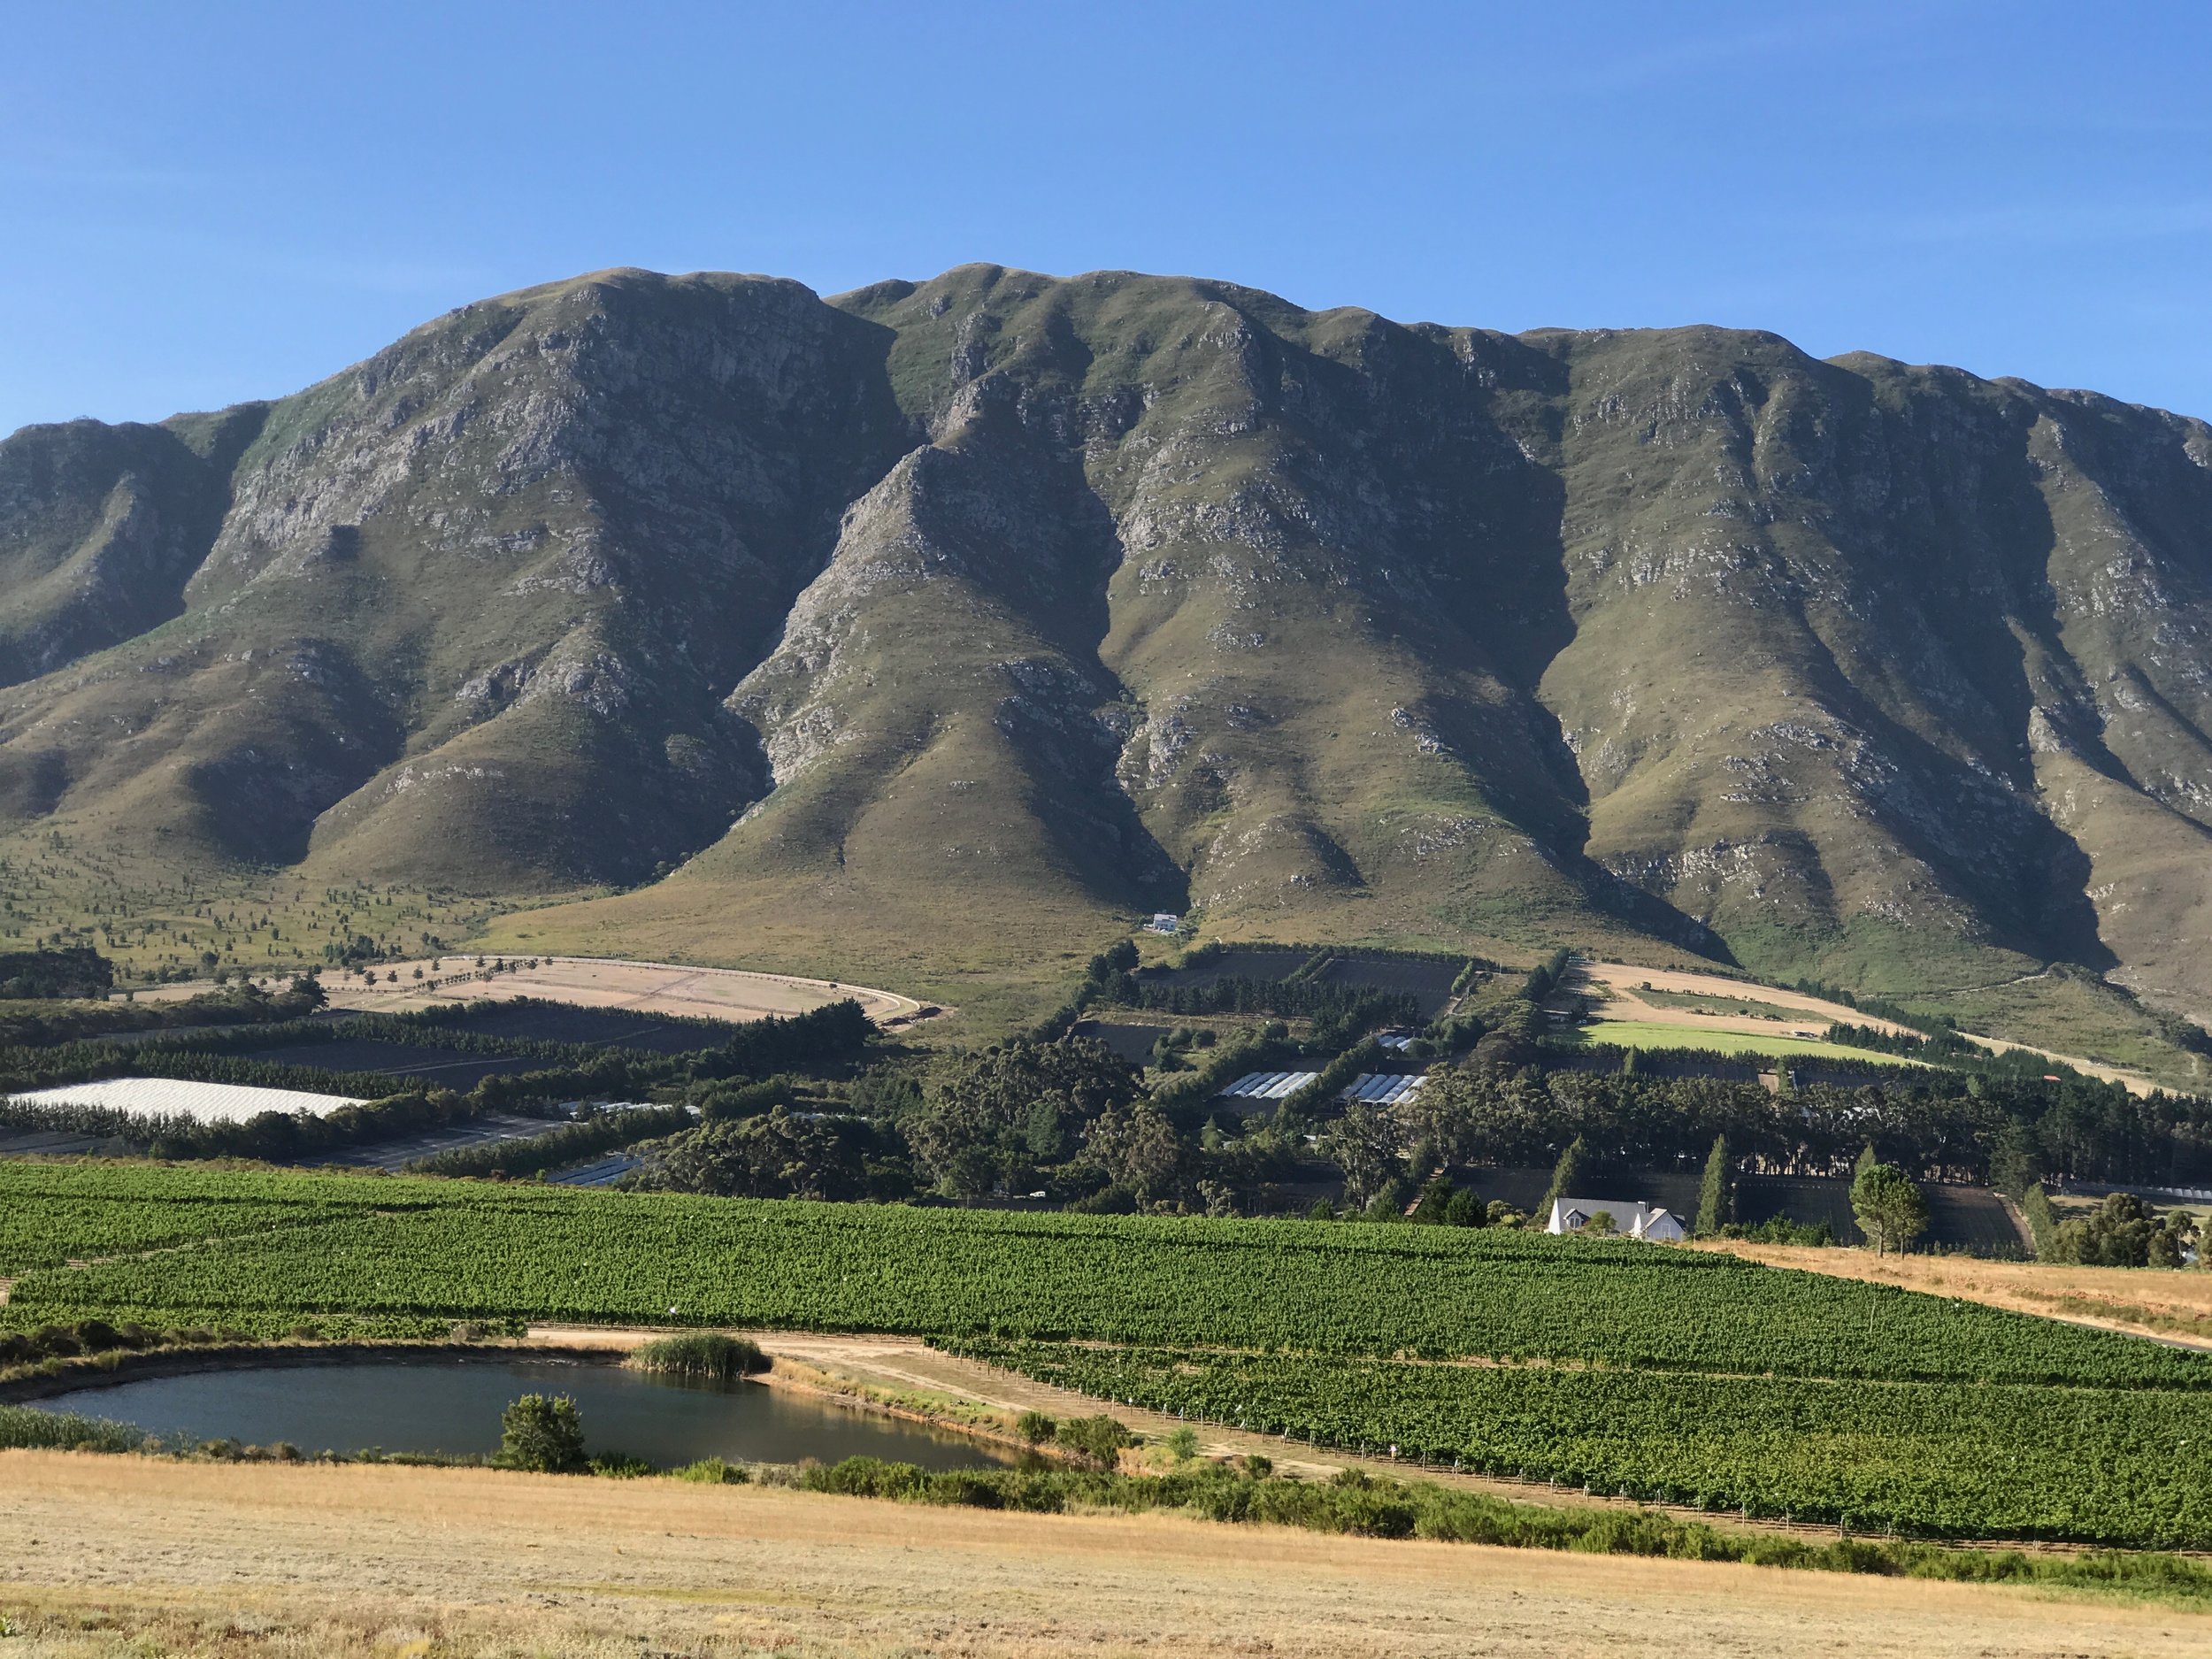 The Overberg